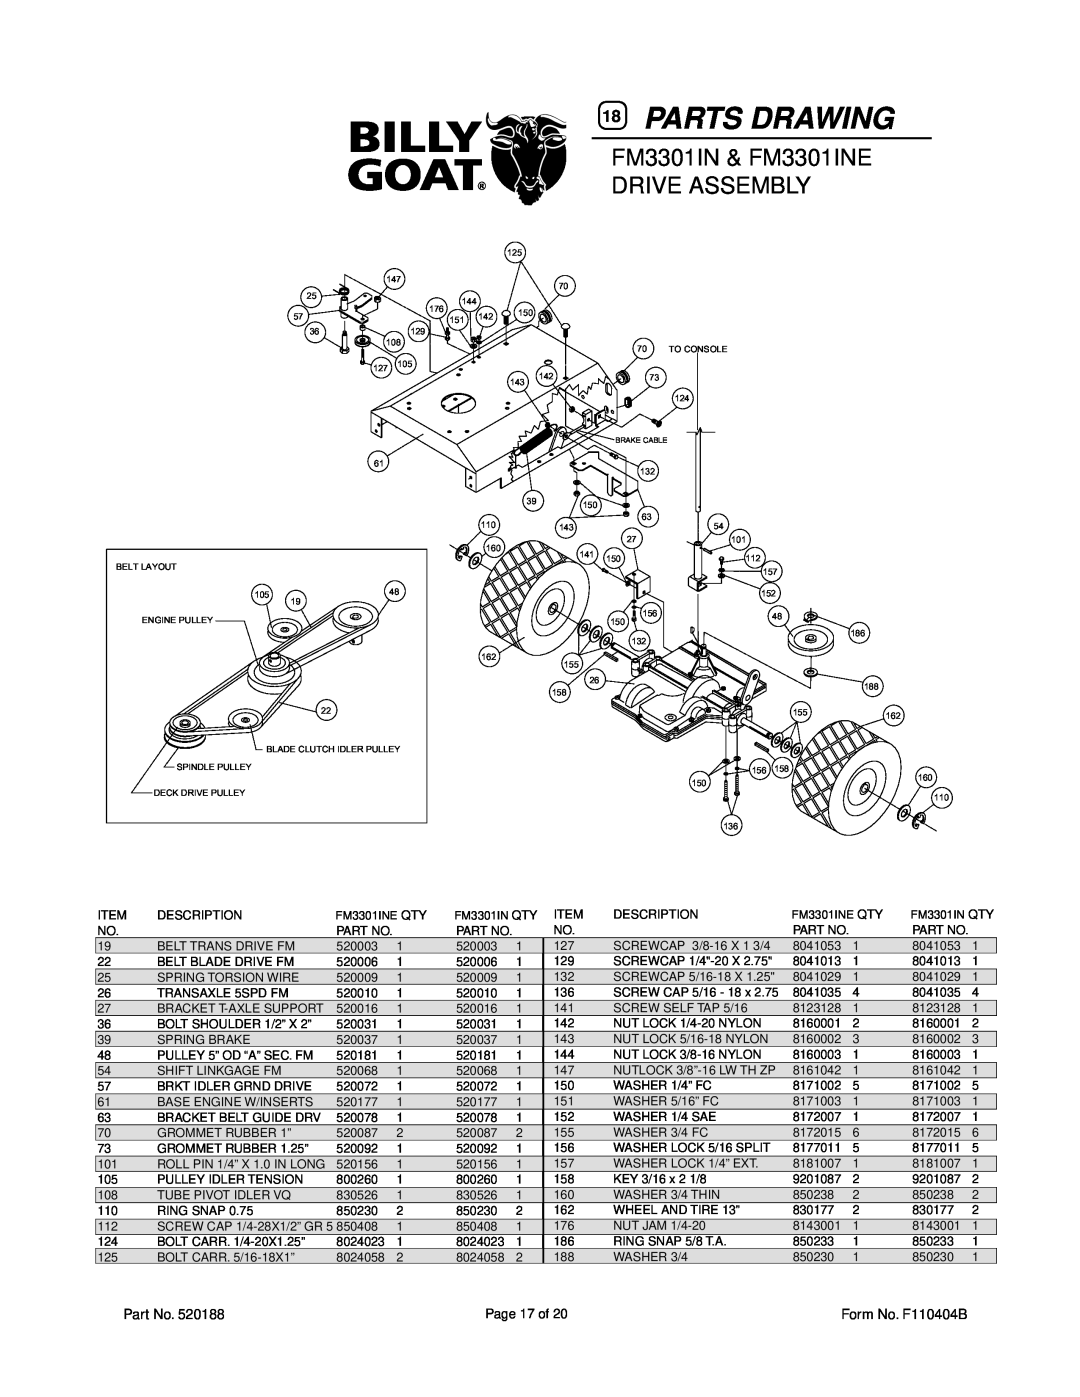 Billy Goat FM3301IN, FM3301INE owner manual FM3301IN & FM3301INE, Drive Assembly, Parts Drawing 